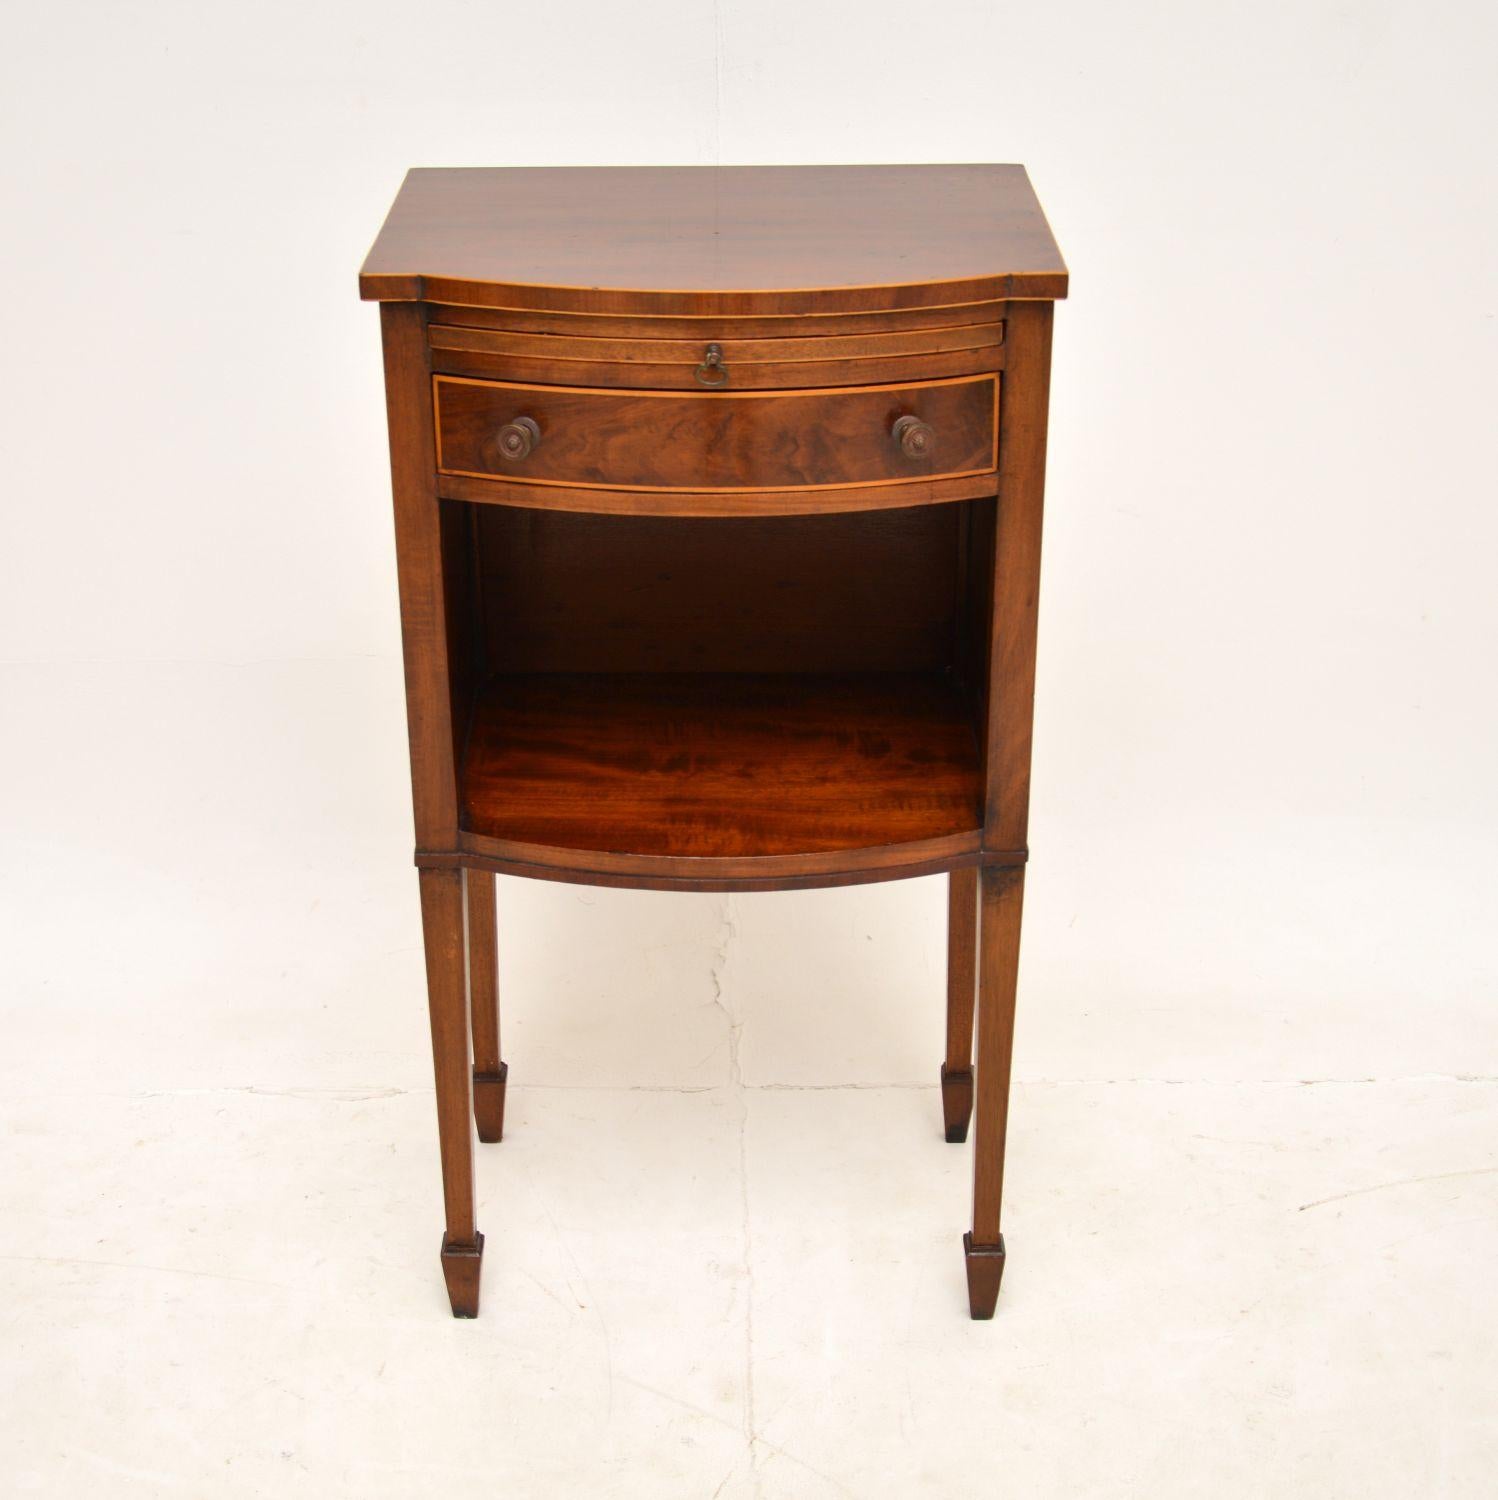 A lovely antique Edwardian side cabinet. This was made in England, it dates from the 1900-1910 period.

The quality is fantastic, this is a very useful size, perfect for use as a bedside cabinet or in various settings around the home. There is a